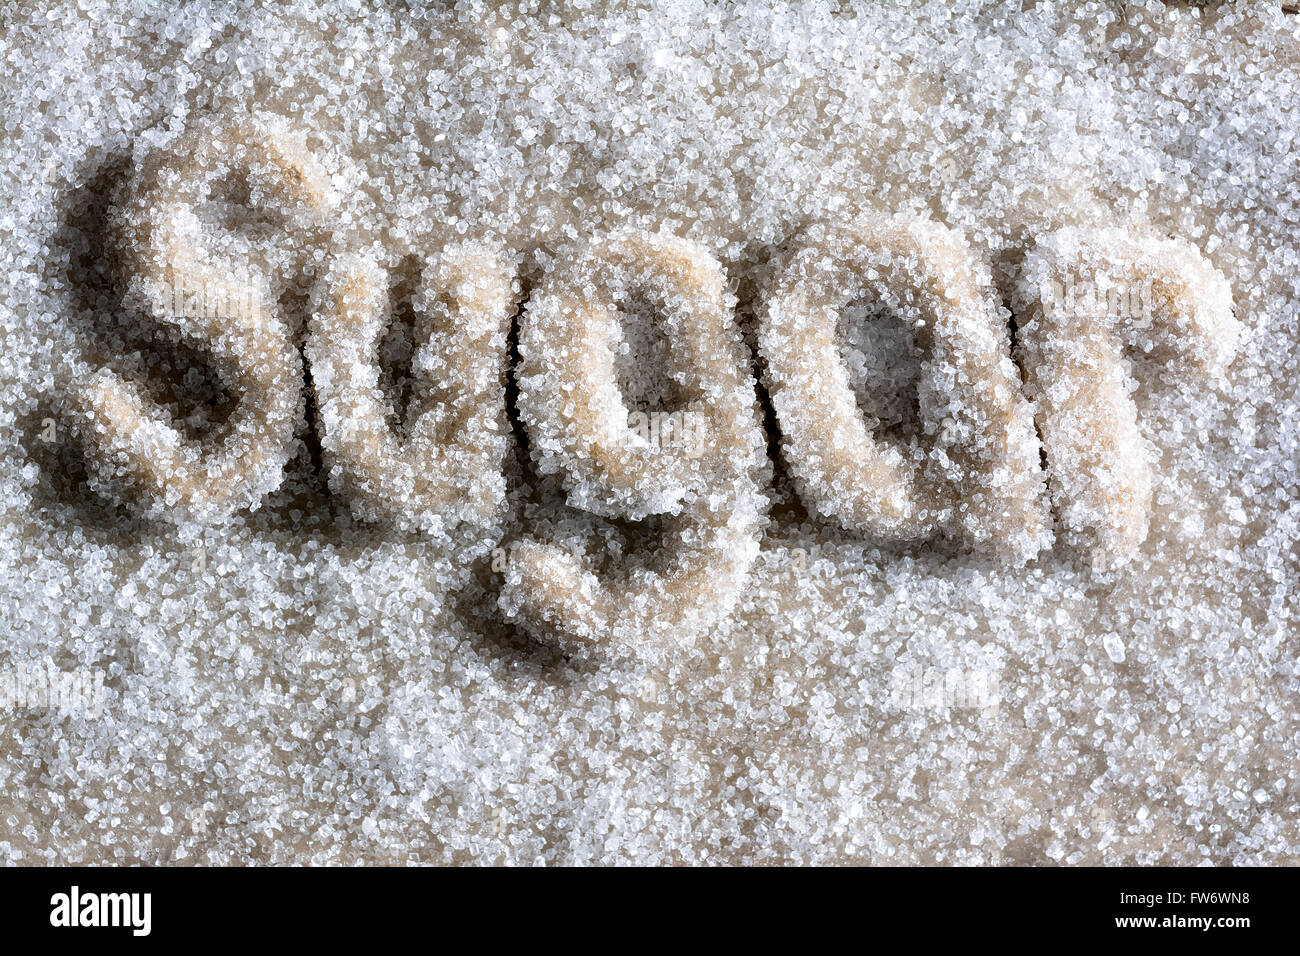 Sugar crystals on sugary pastry lettering Stock Photo